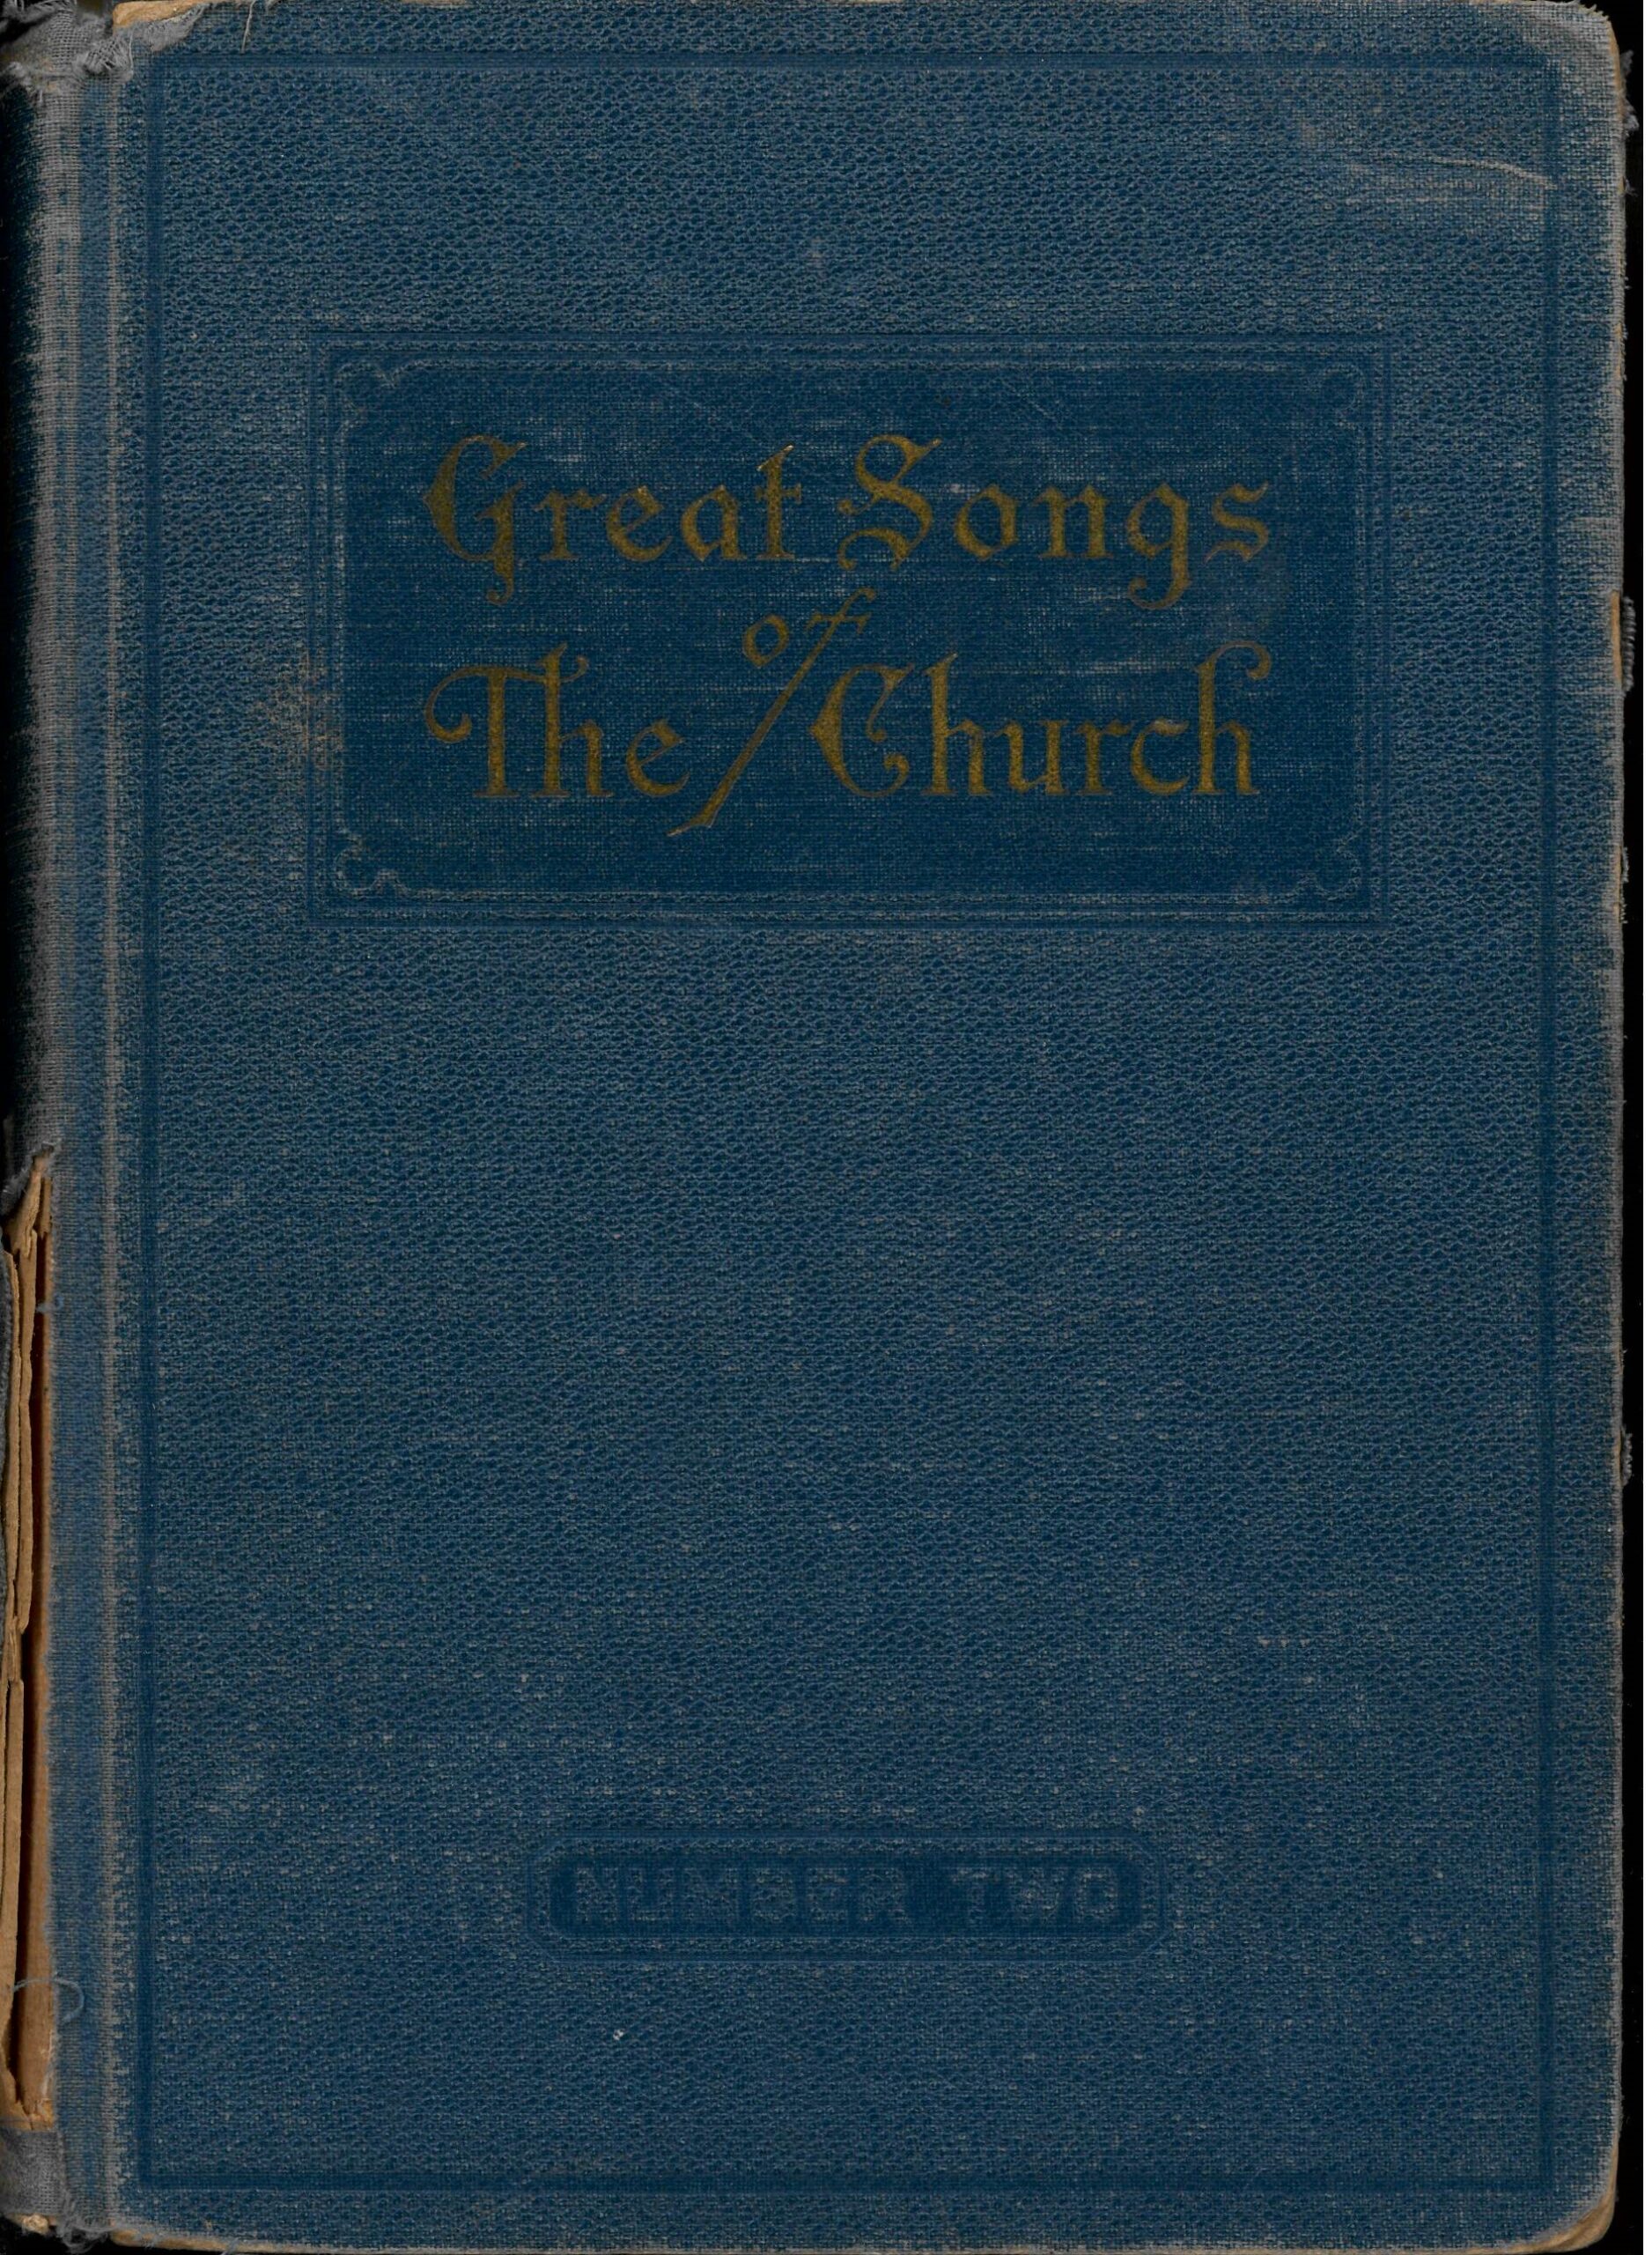 The New Alphabetical Hymnal. Great Songs of the Church Number Two. A Treasury of Six Hundred Sacred Songs Suitable for All Services of the Church. E. L. Jorgenson, Compiler. Great Songs Press: Louisville, 1937.